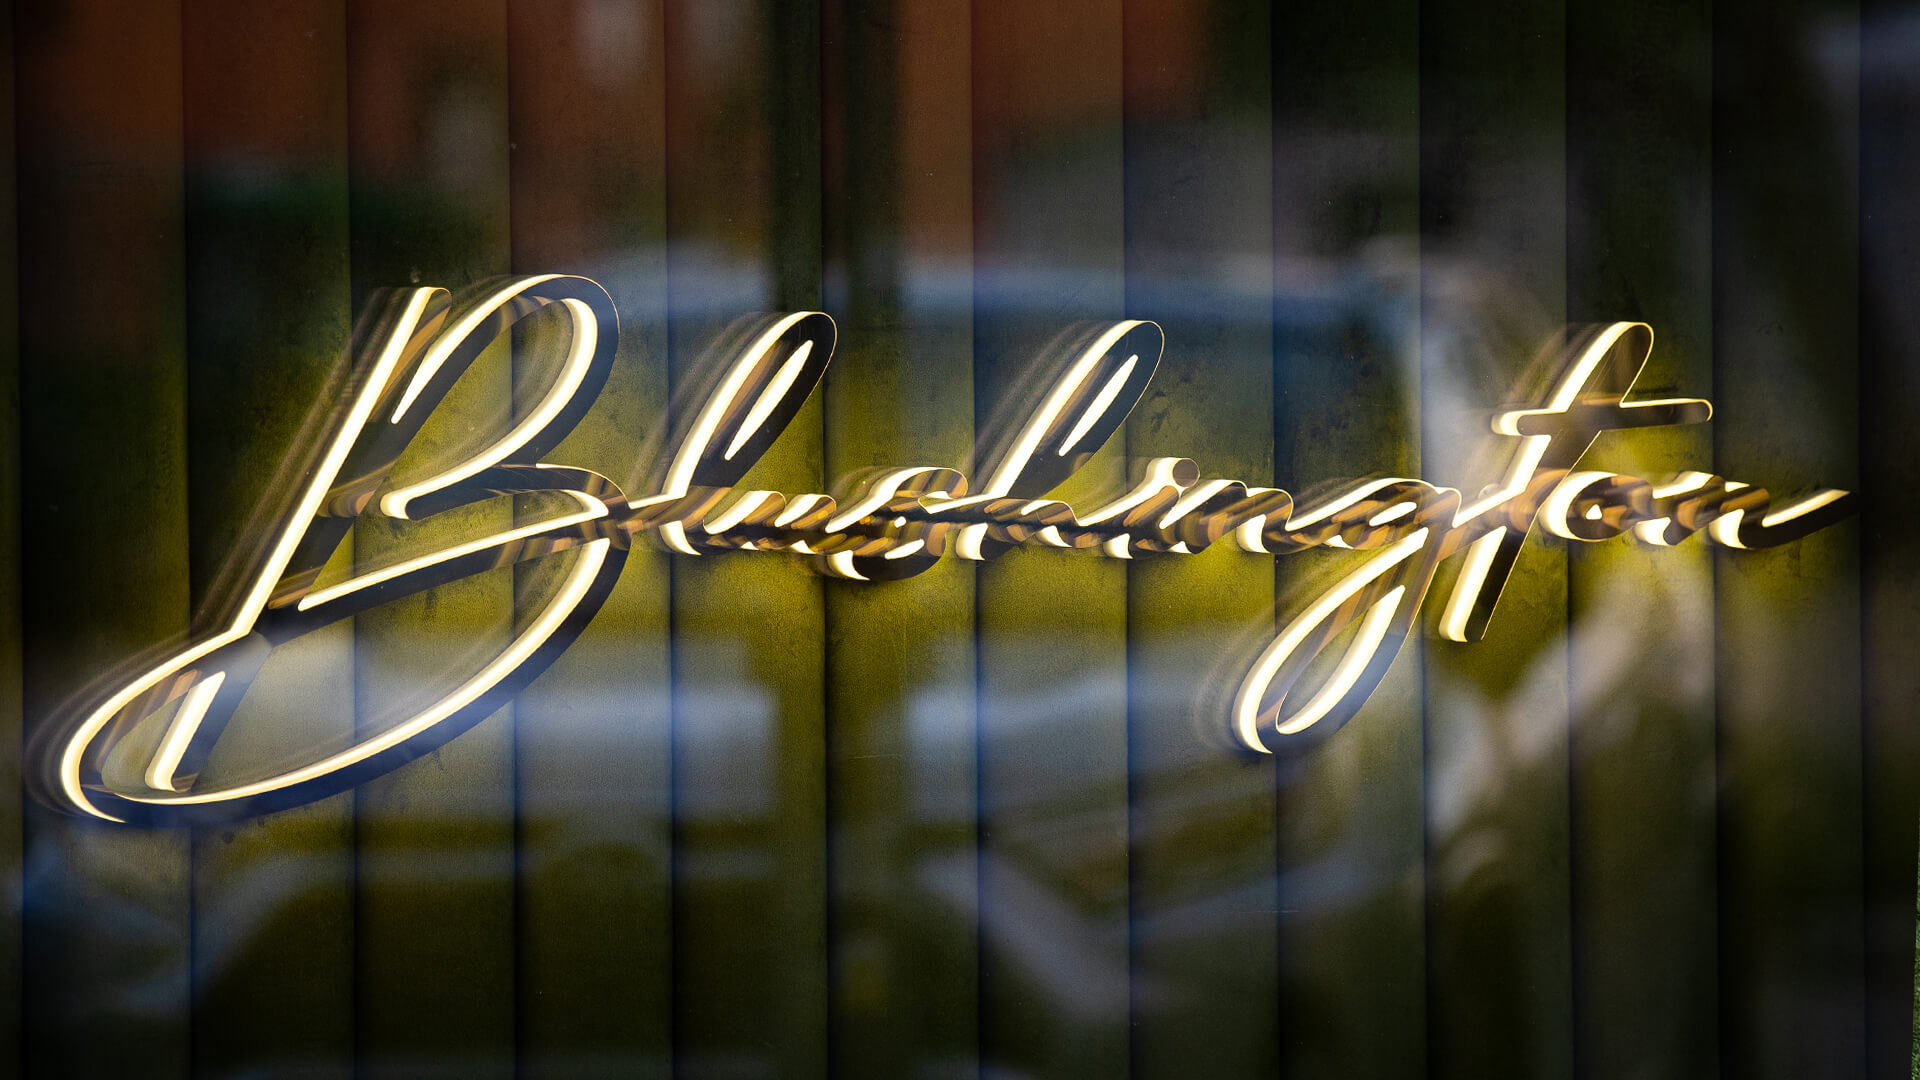 Blushington - Blushington letters glowing LED side, in gold color.